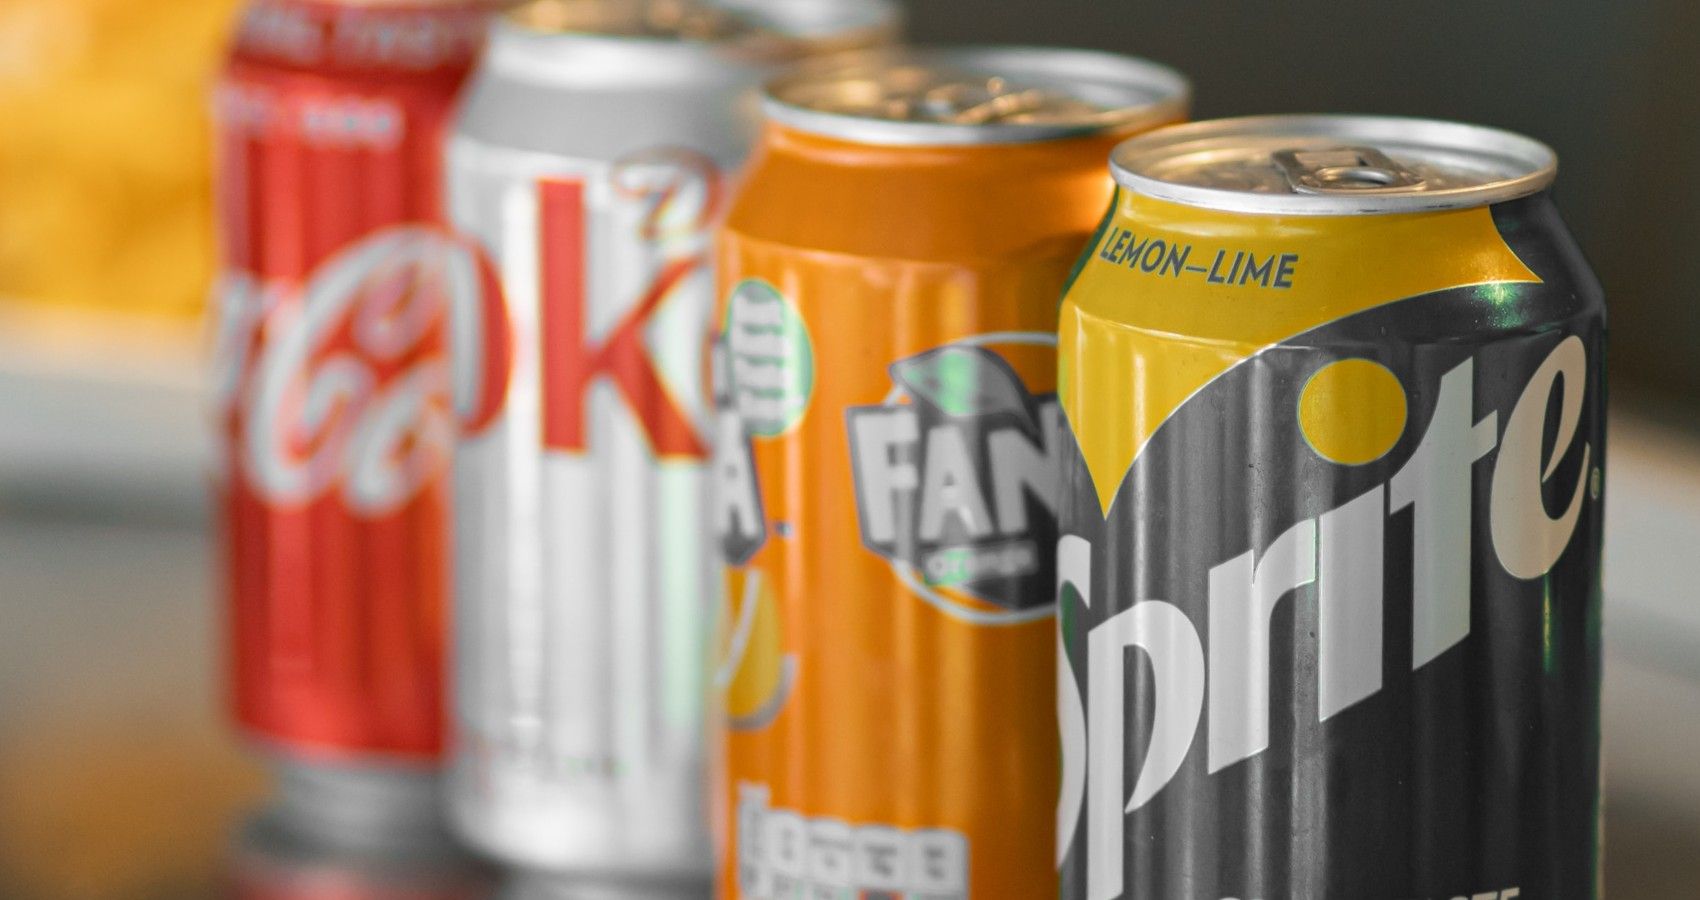 Soft Drinks In Pregnancy Can Lead To ADHD Development, Study Finds